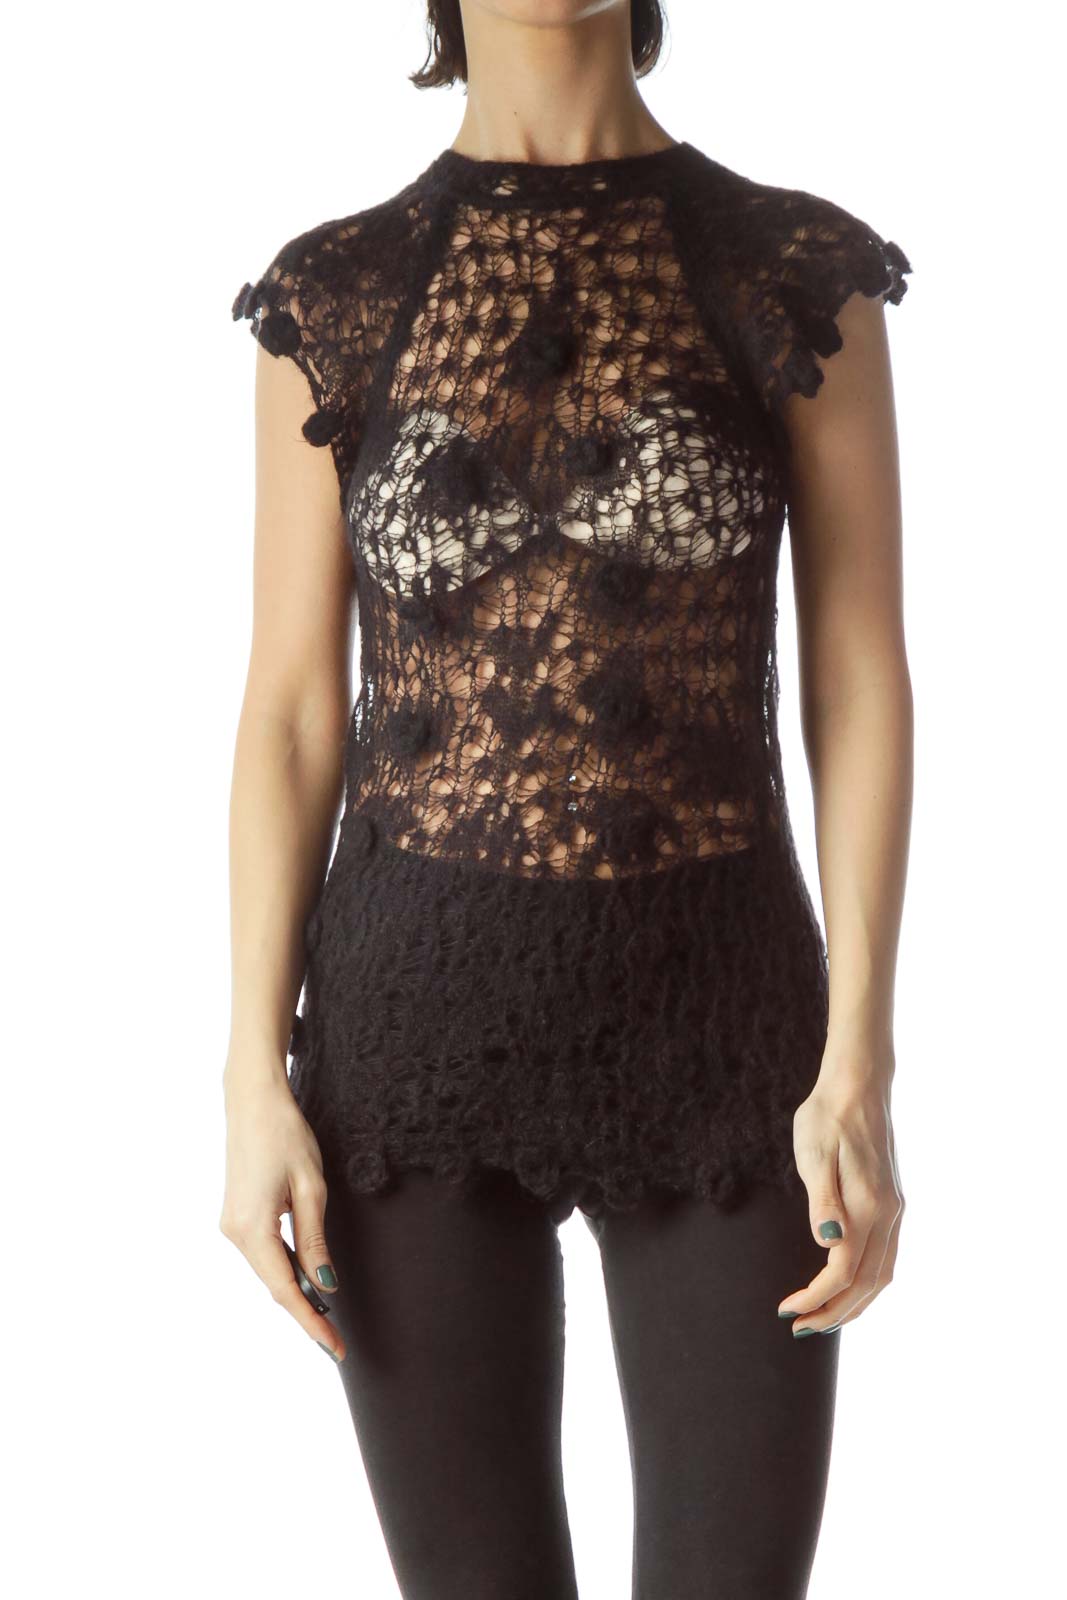 Black See-Through Knit Top Front